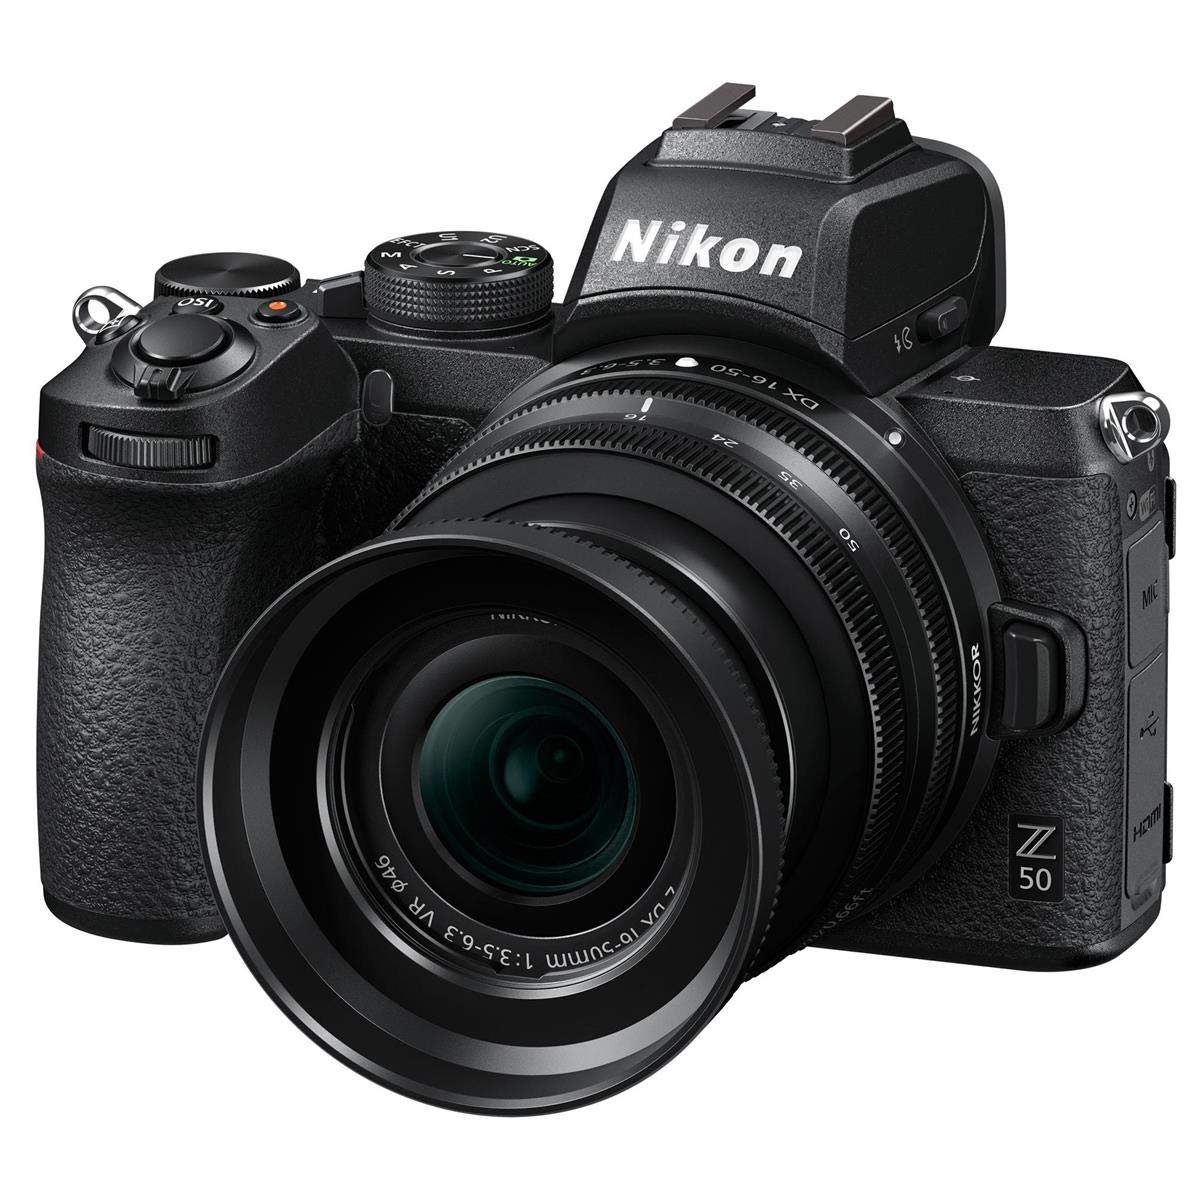 Nikon Z 50 DX-Format Mirrorless Camera with 16-50mm f/3.5-6.3 VR Lens, Bundle with FTZ II Mount Adapter and Accessories